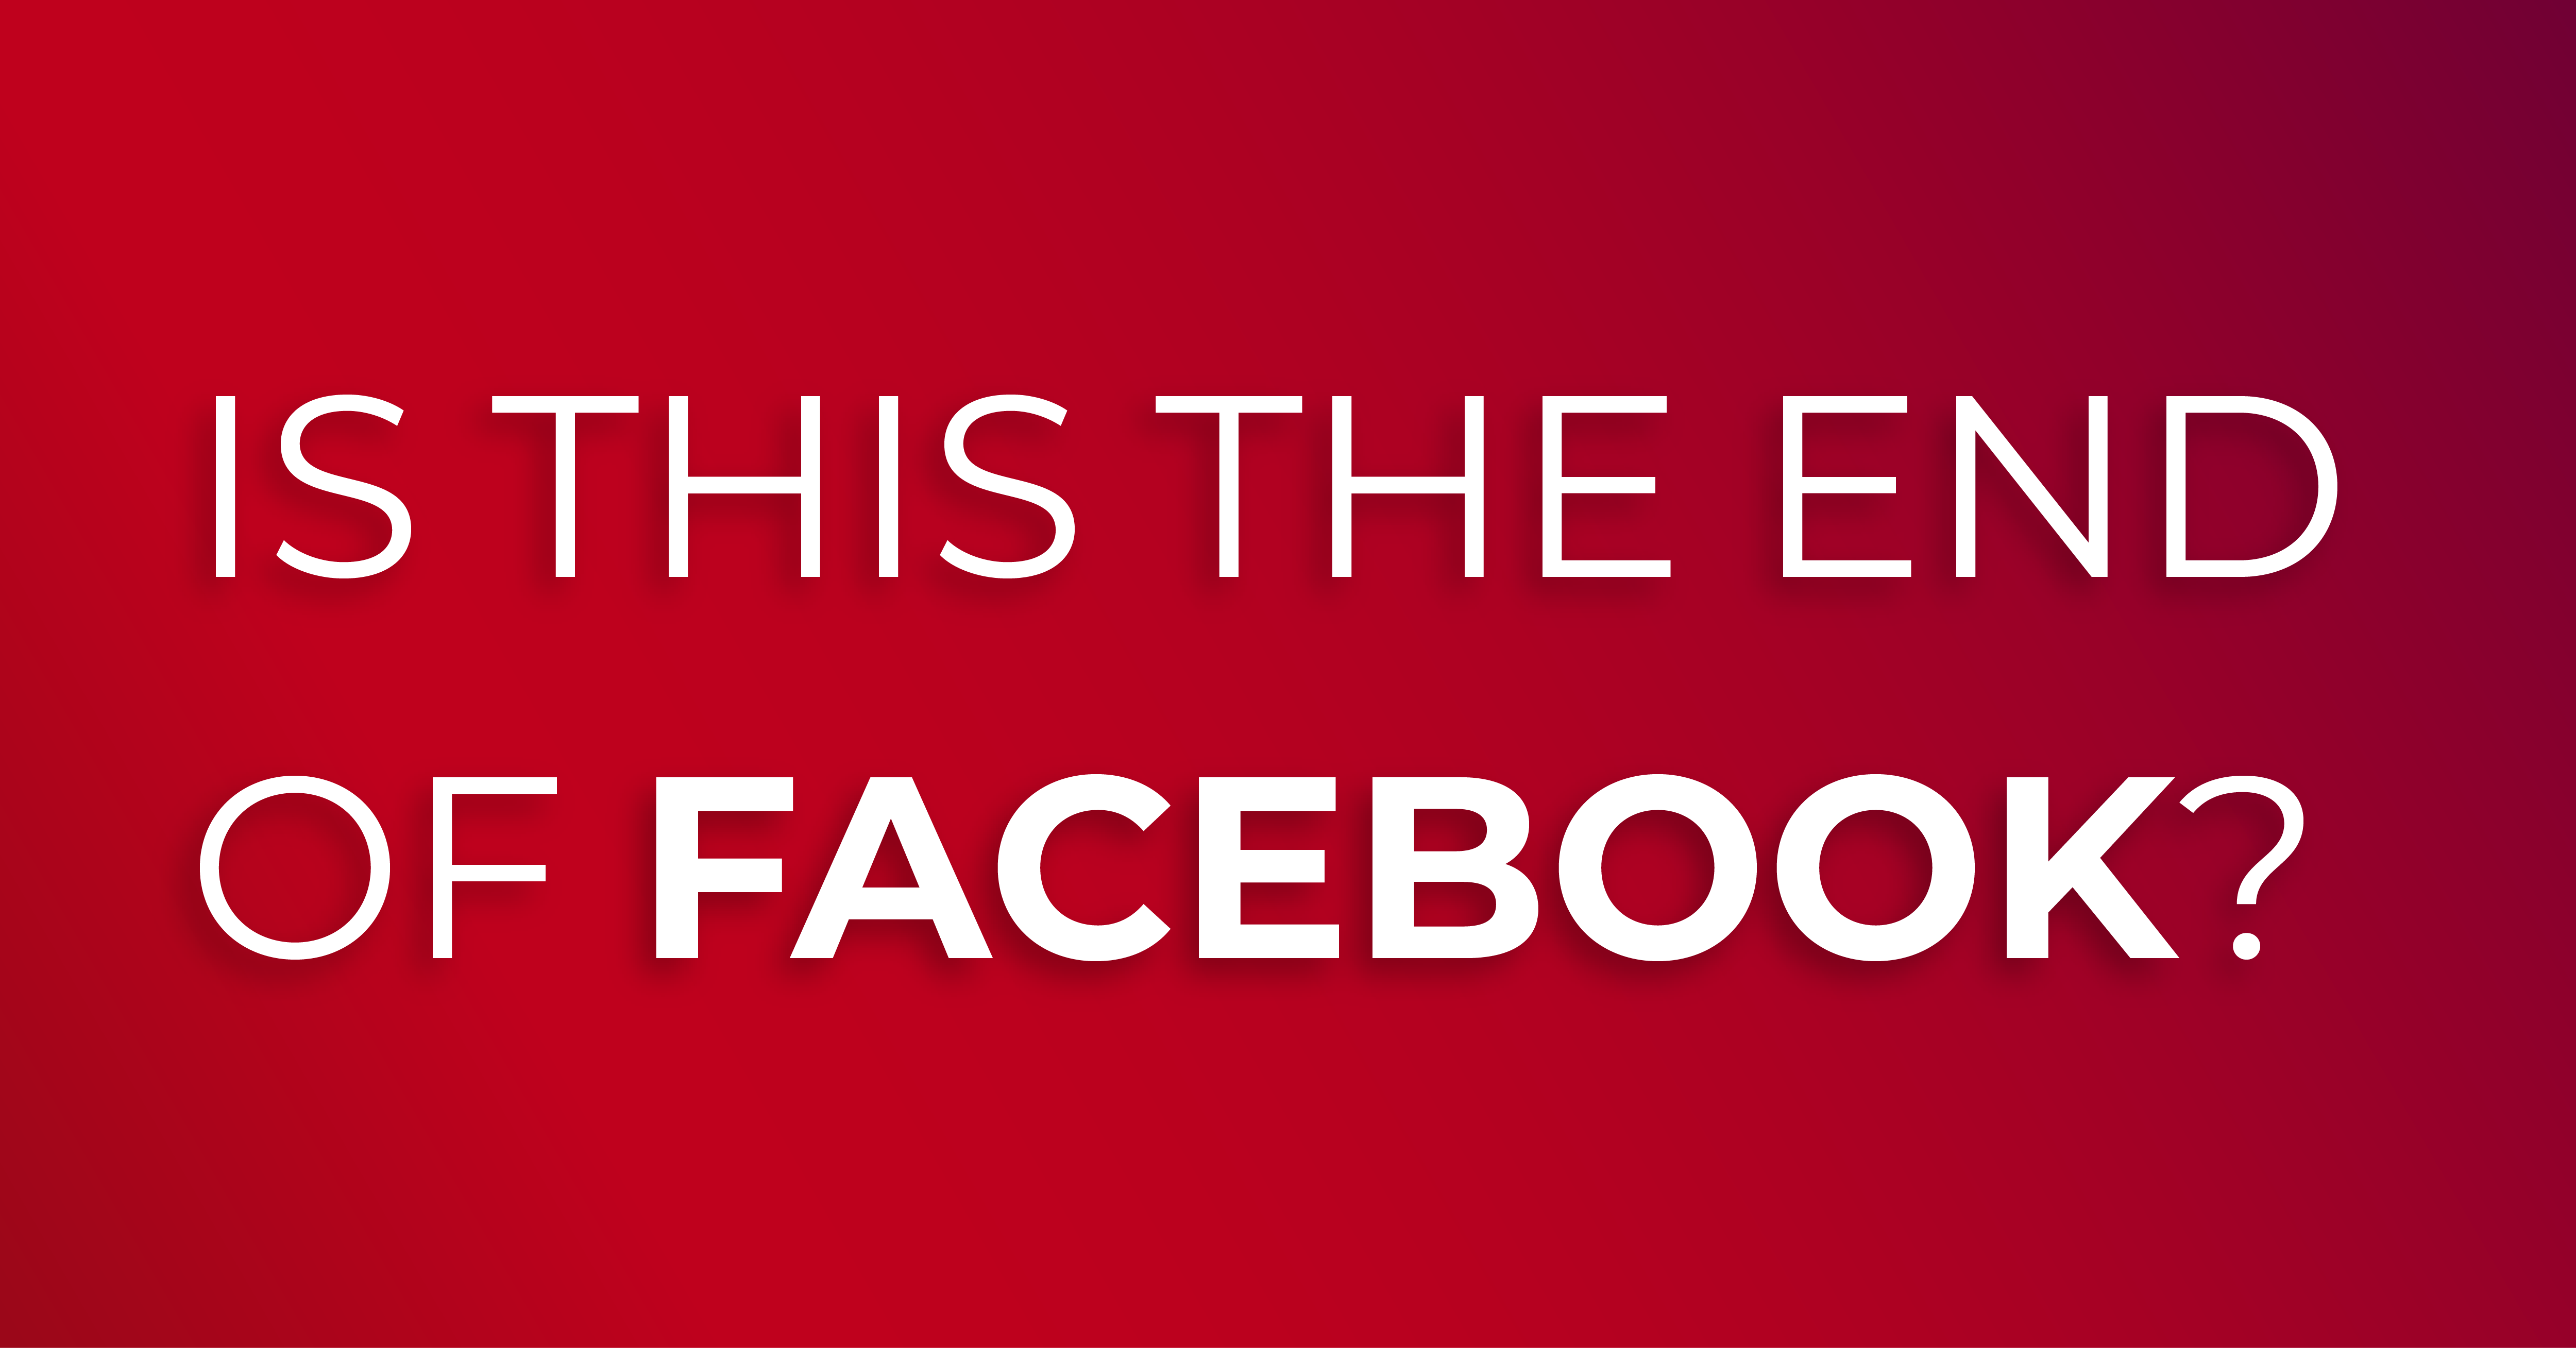 the end of facebook what marketers should know